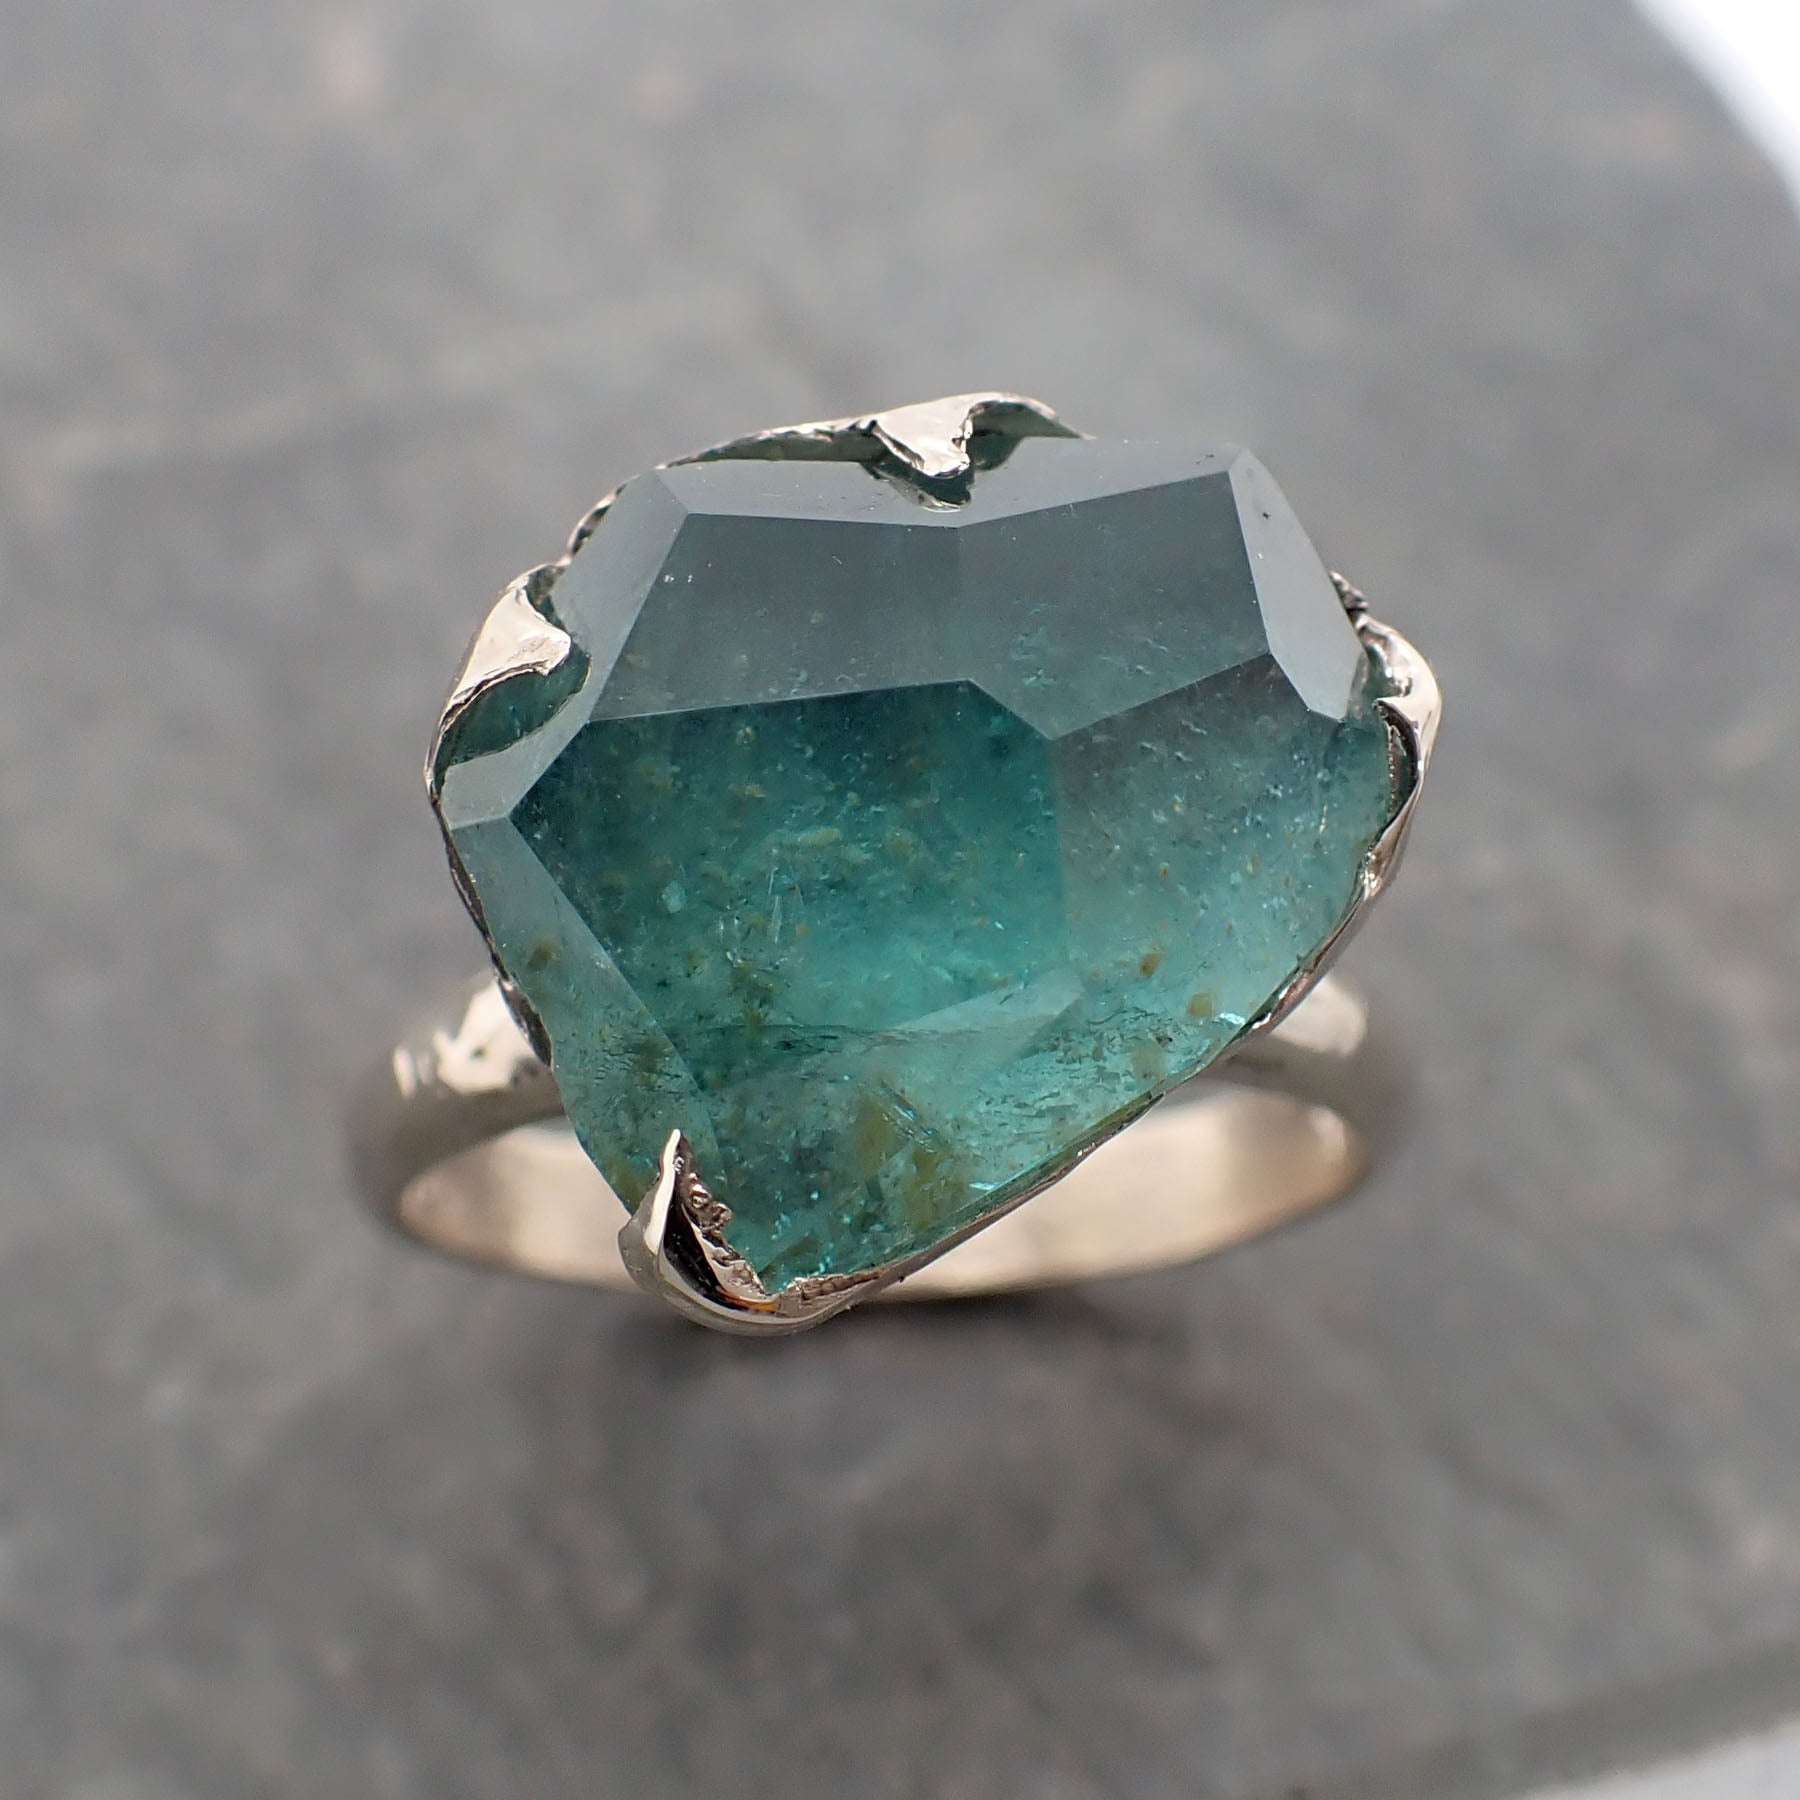 partially faceted sea green tourmaline white gold ring gemstone tourmaline recycled 18k stacking statement byangeline 2372 Alternative Engagement